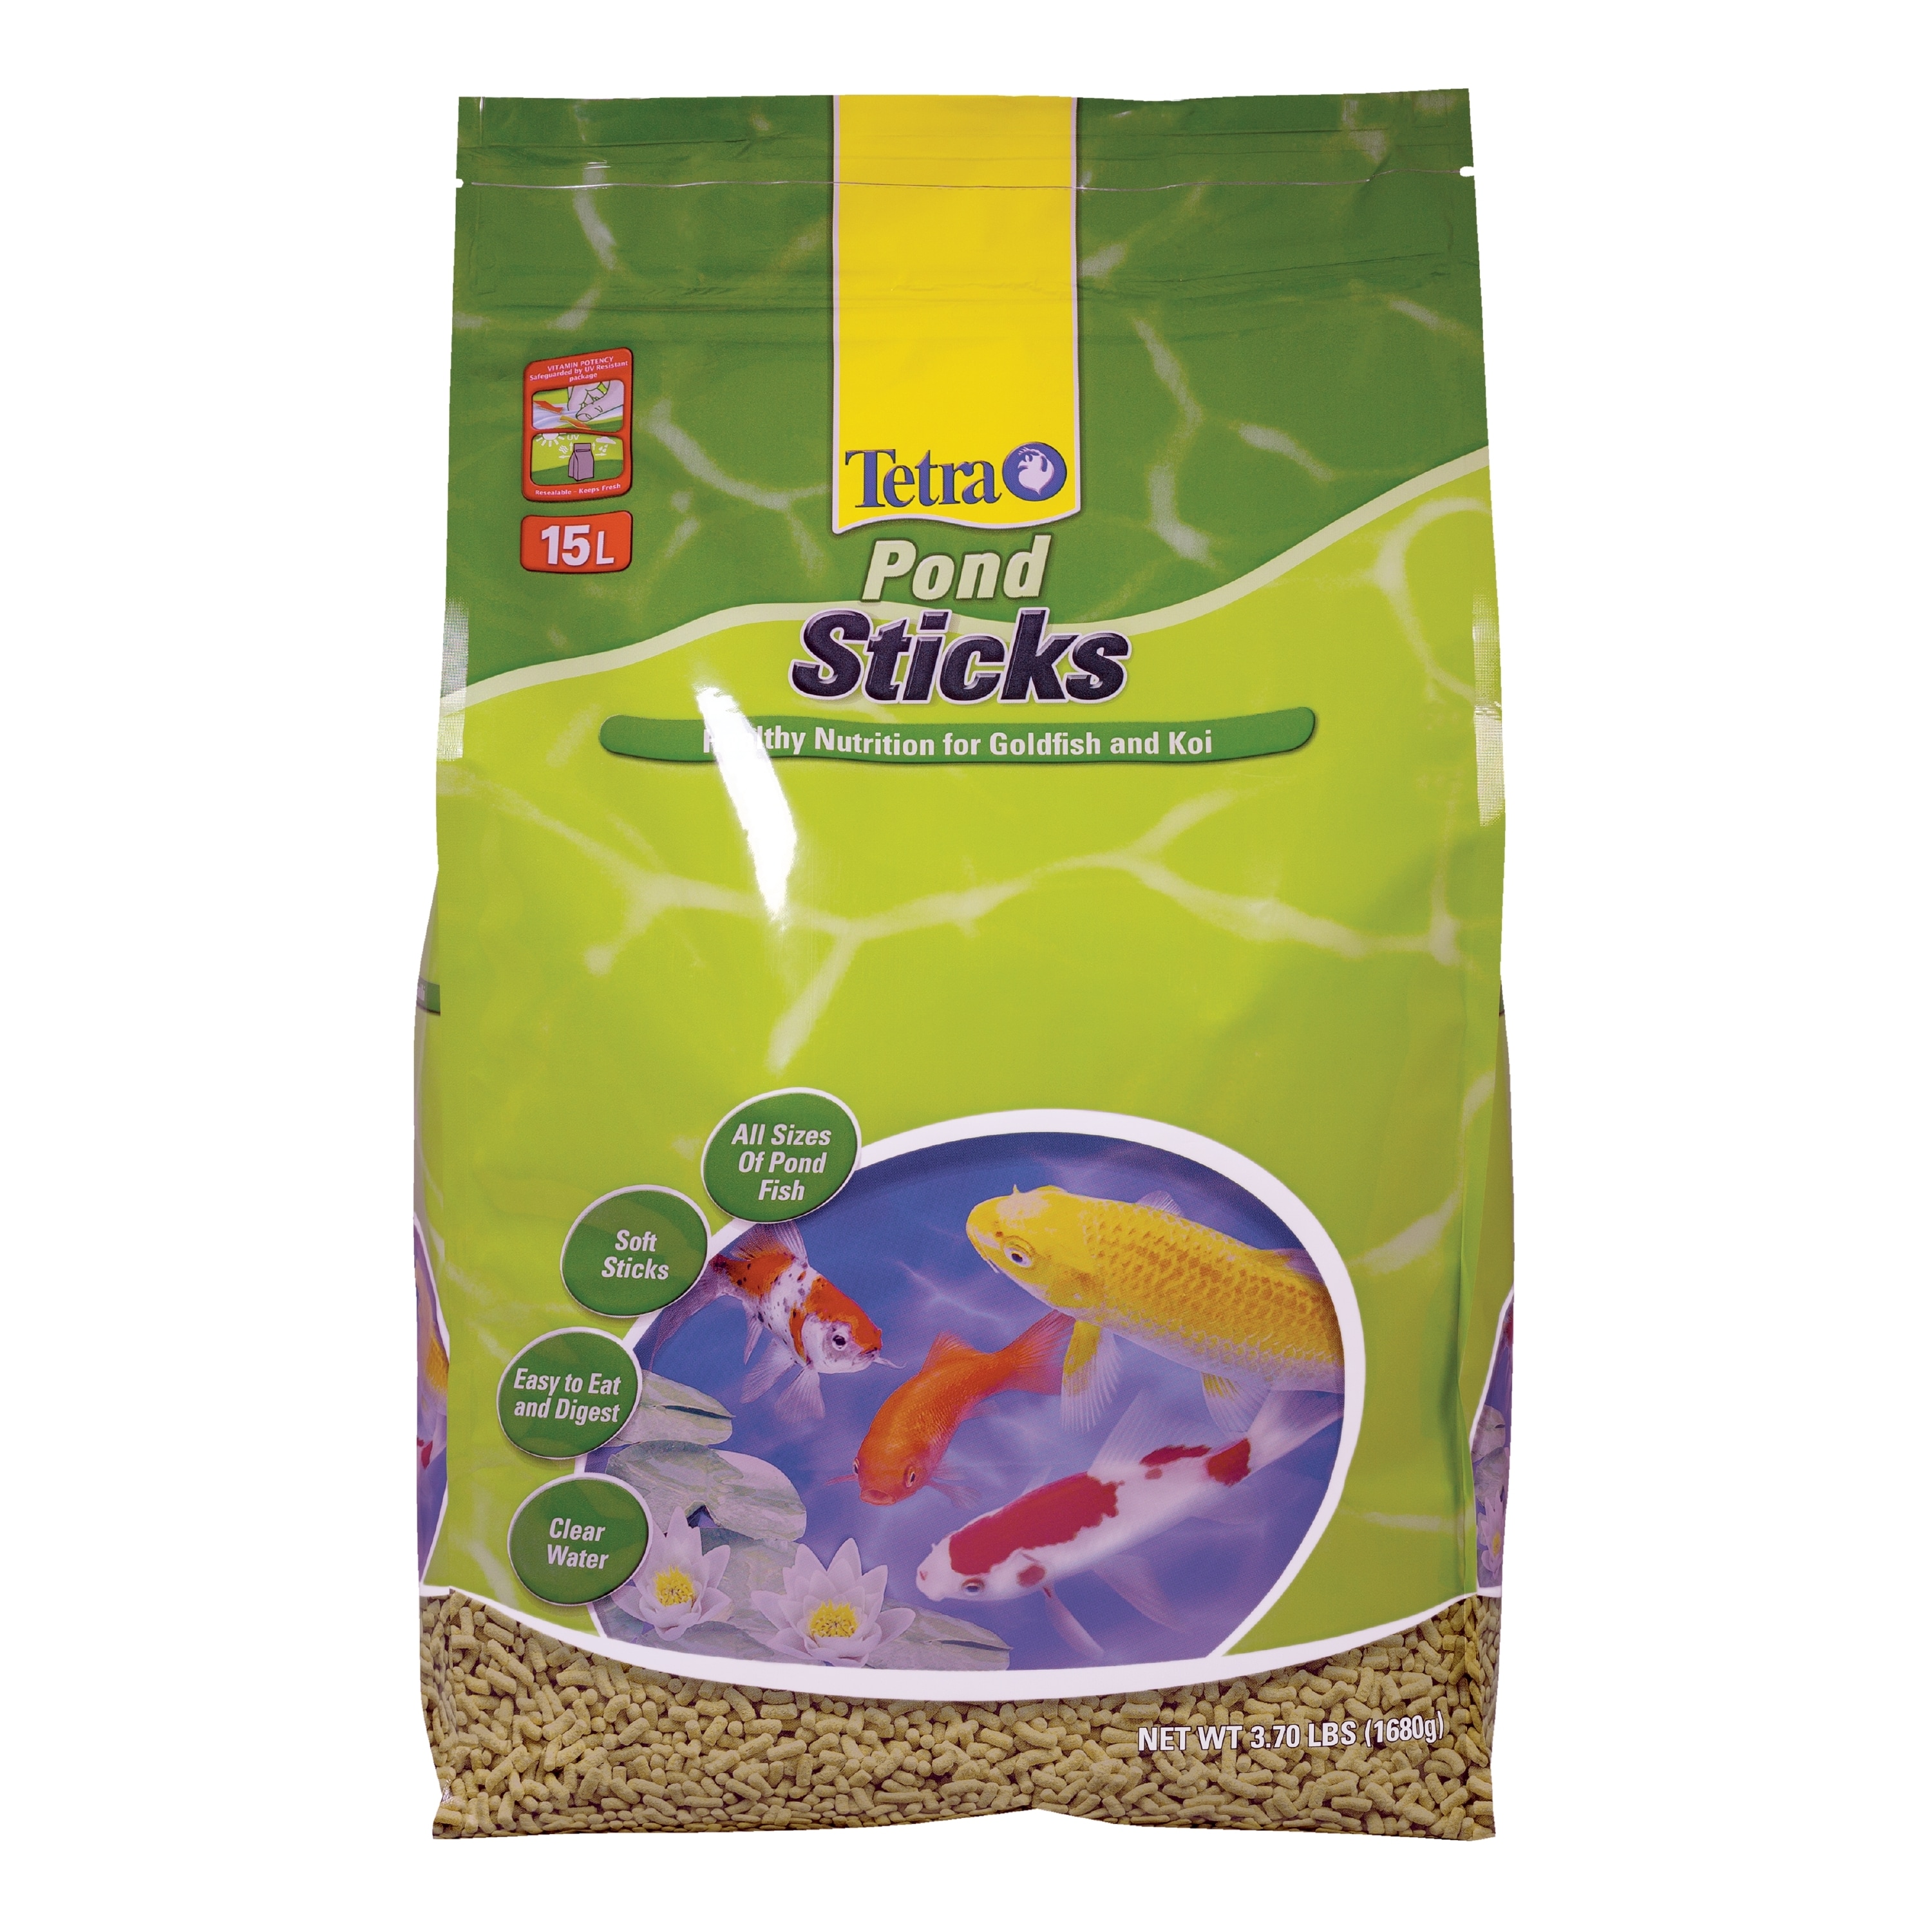 Tetra Brown Pond Fish Food Sticks in the Pond Accessories